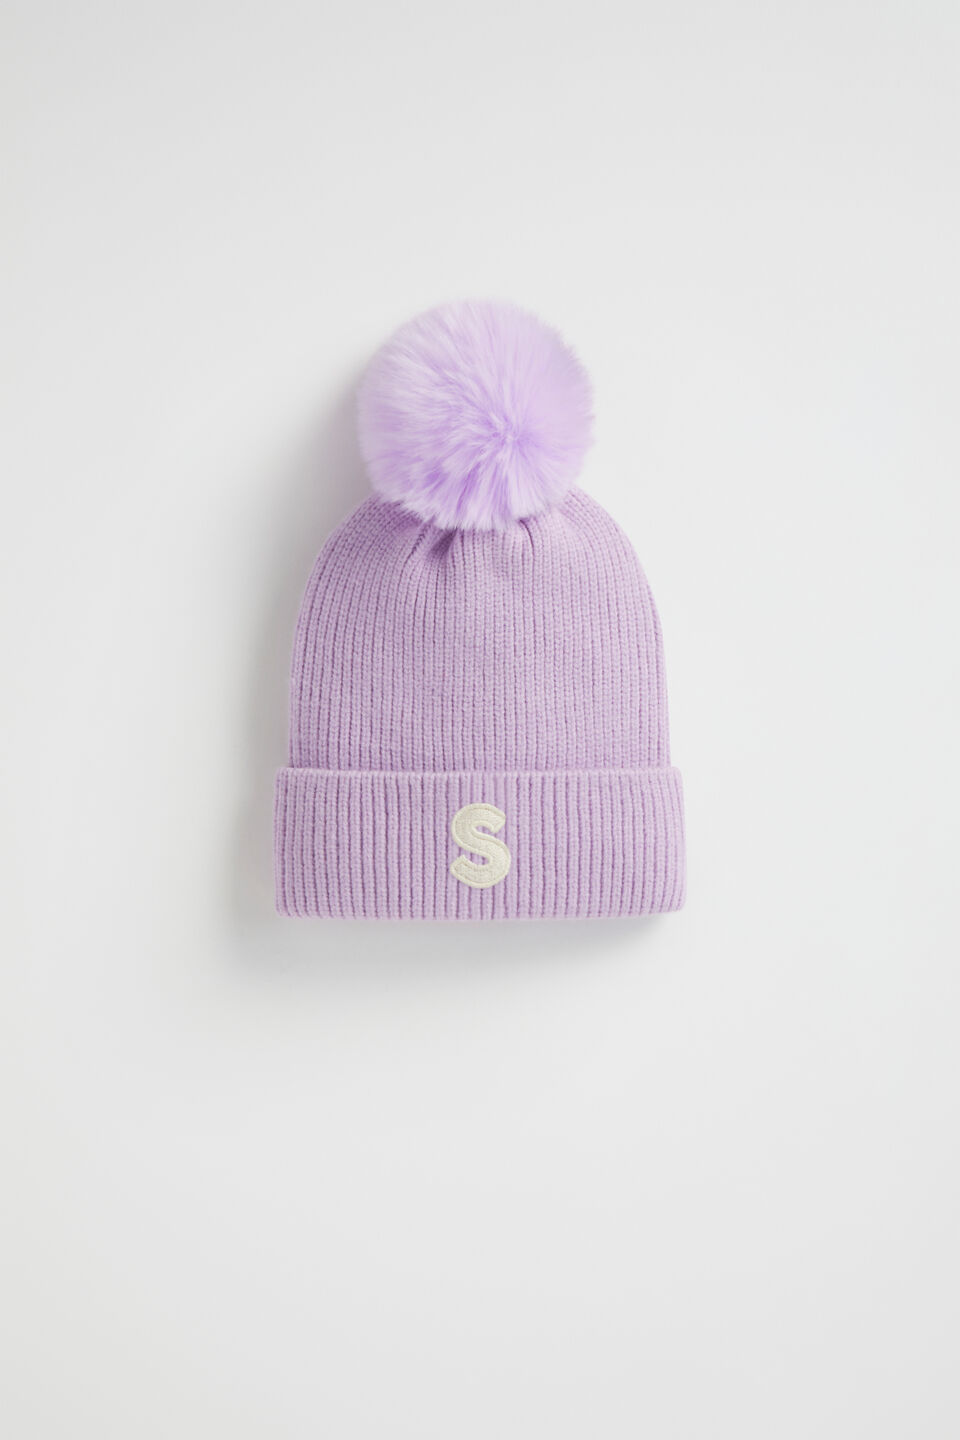 Embroidered Initial Beanie  S